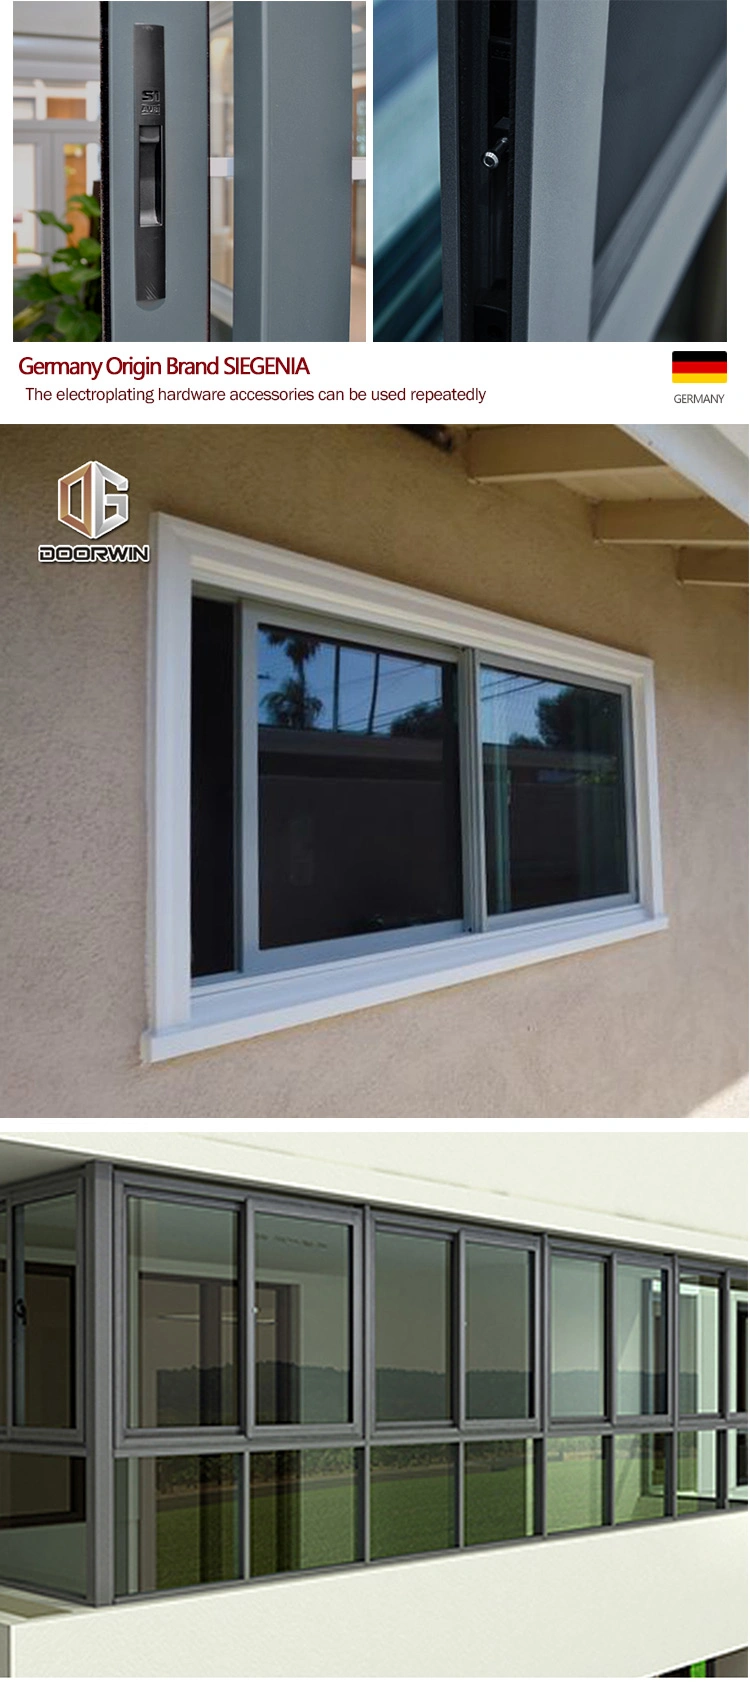 Top Quality Window for Container House, Sliding Window for Fabricated House, Top Quality Brand Profile Window